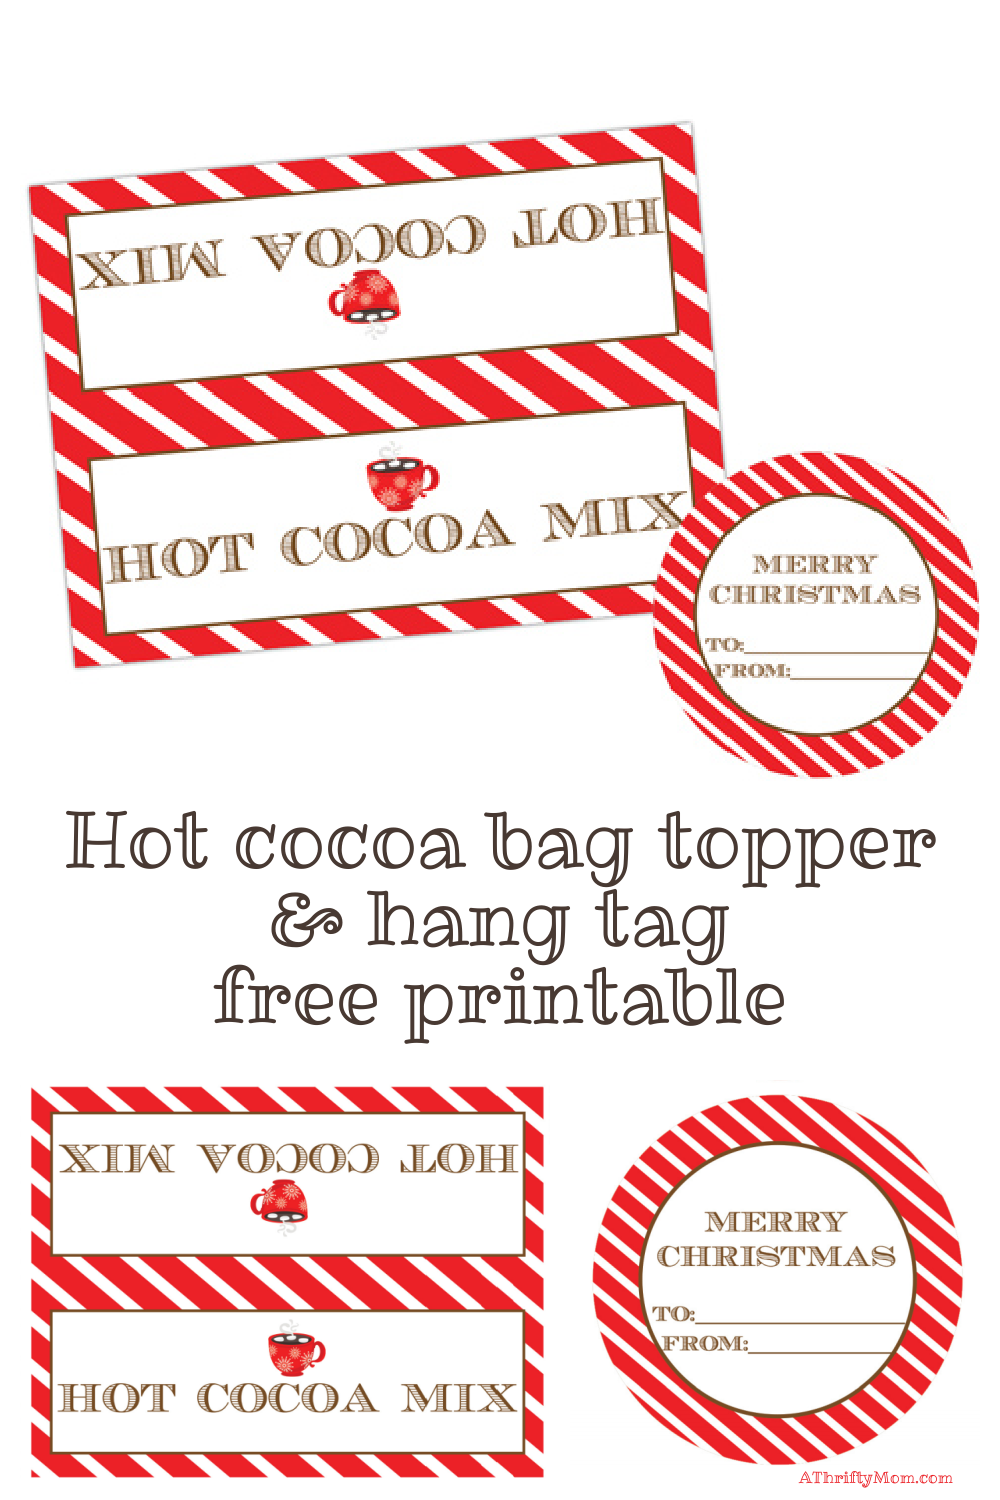 Hot Cocoa Bag Topper And Gift Tag Free Printable Free Printable Gift Tags Free Gift Tags Free Christmas Printables